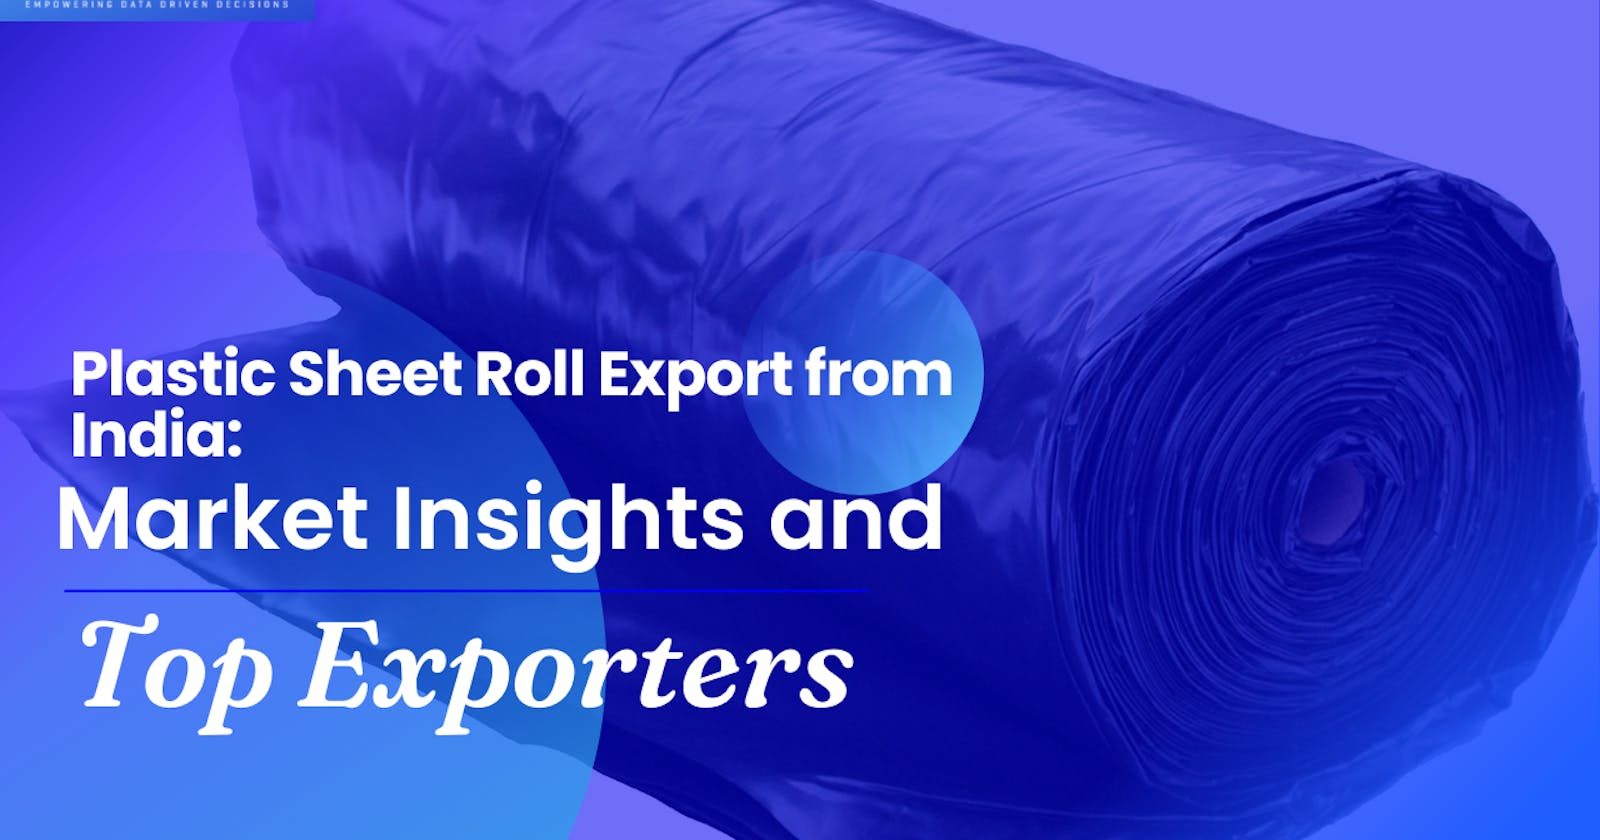 Plastic Sheet Roll Export from India: Market Insights and Top Exporters